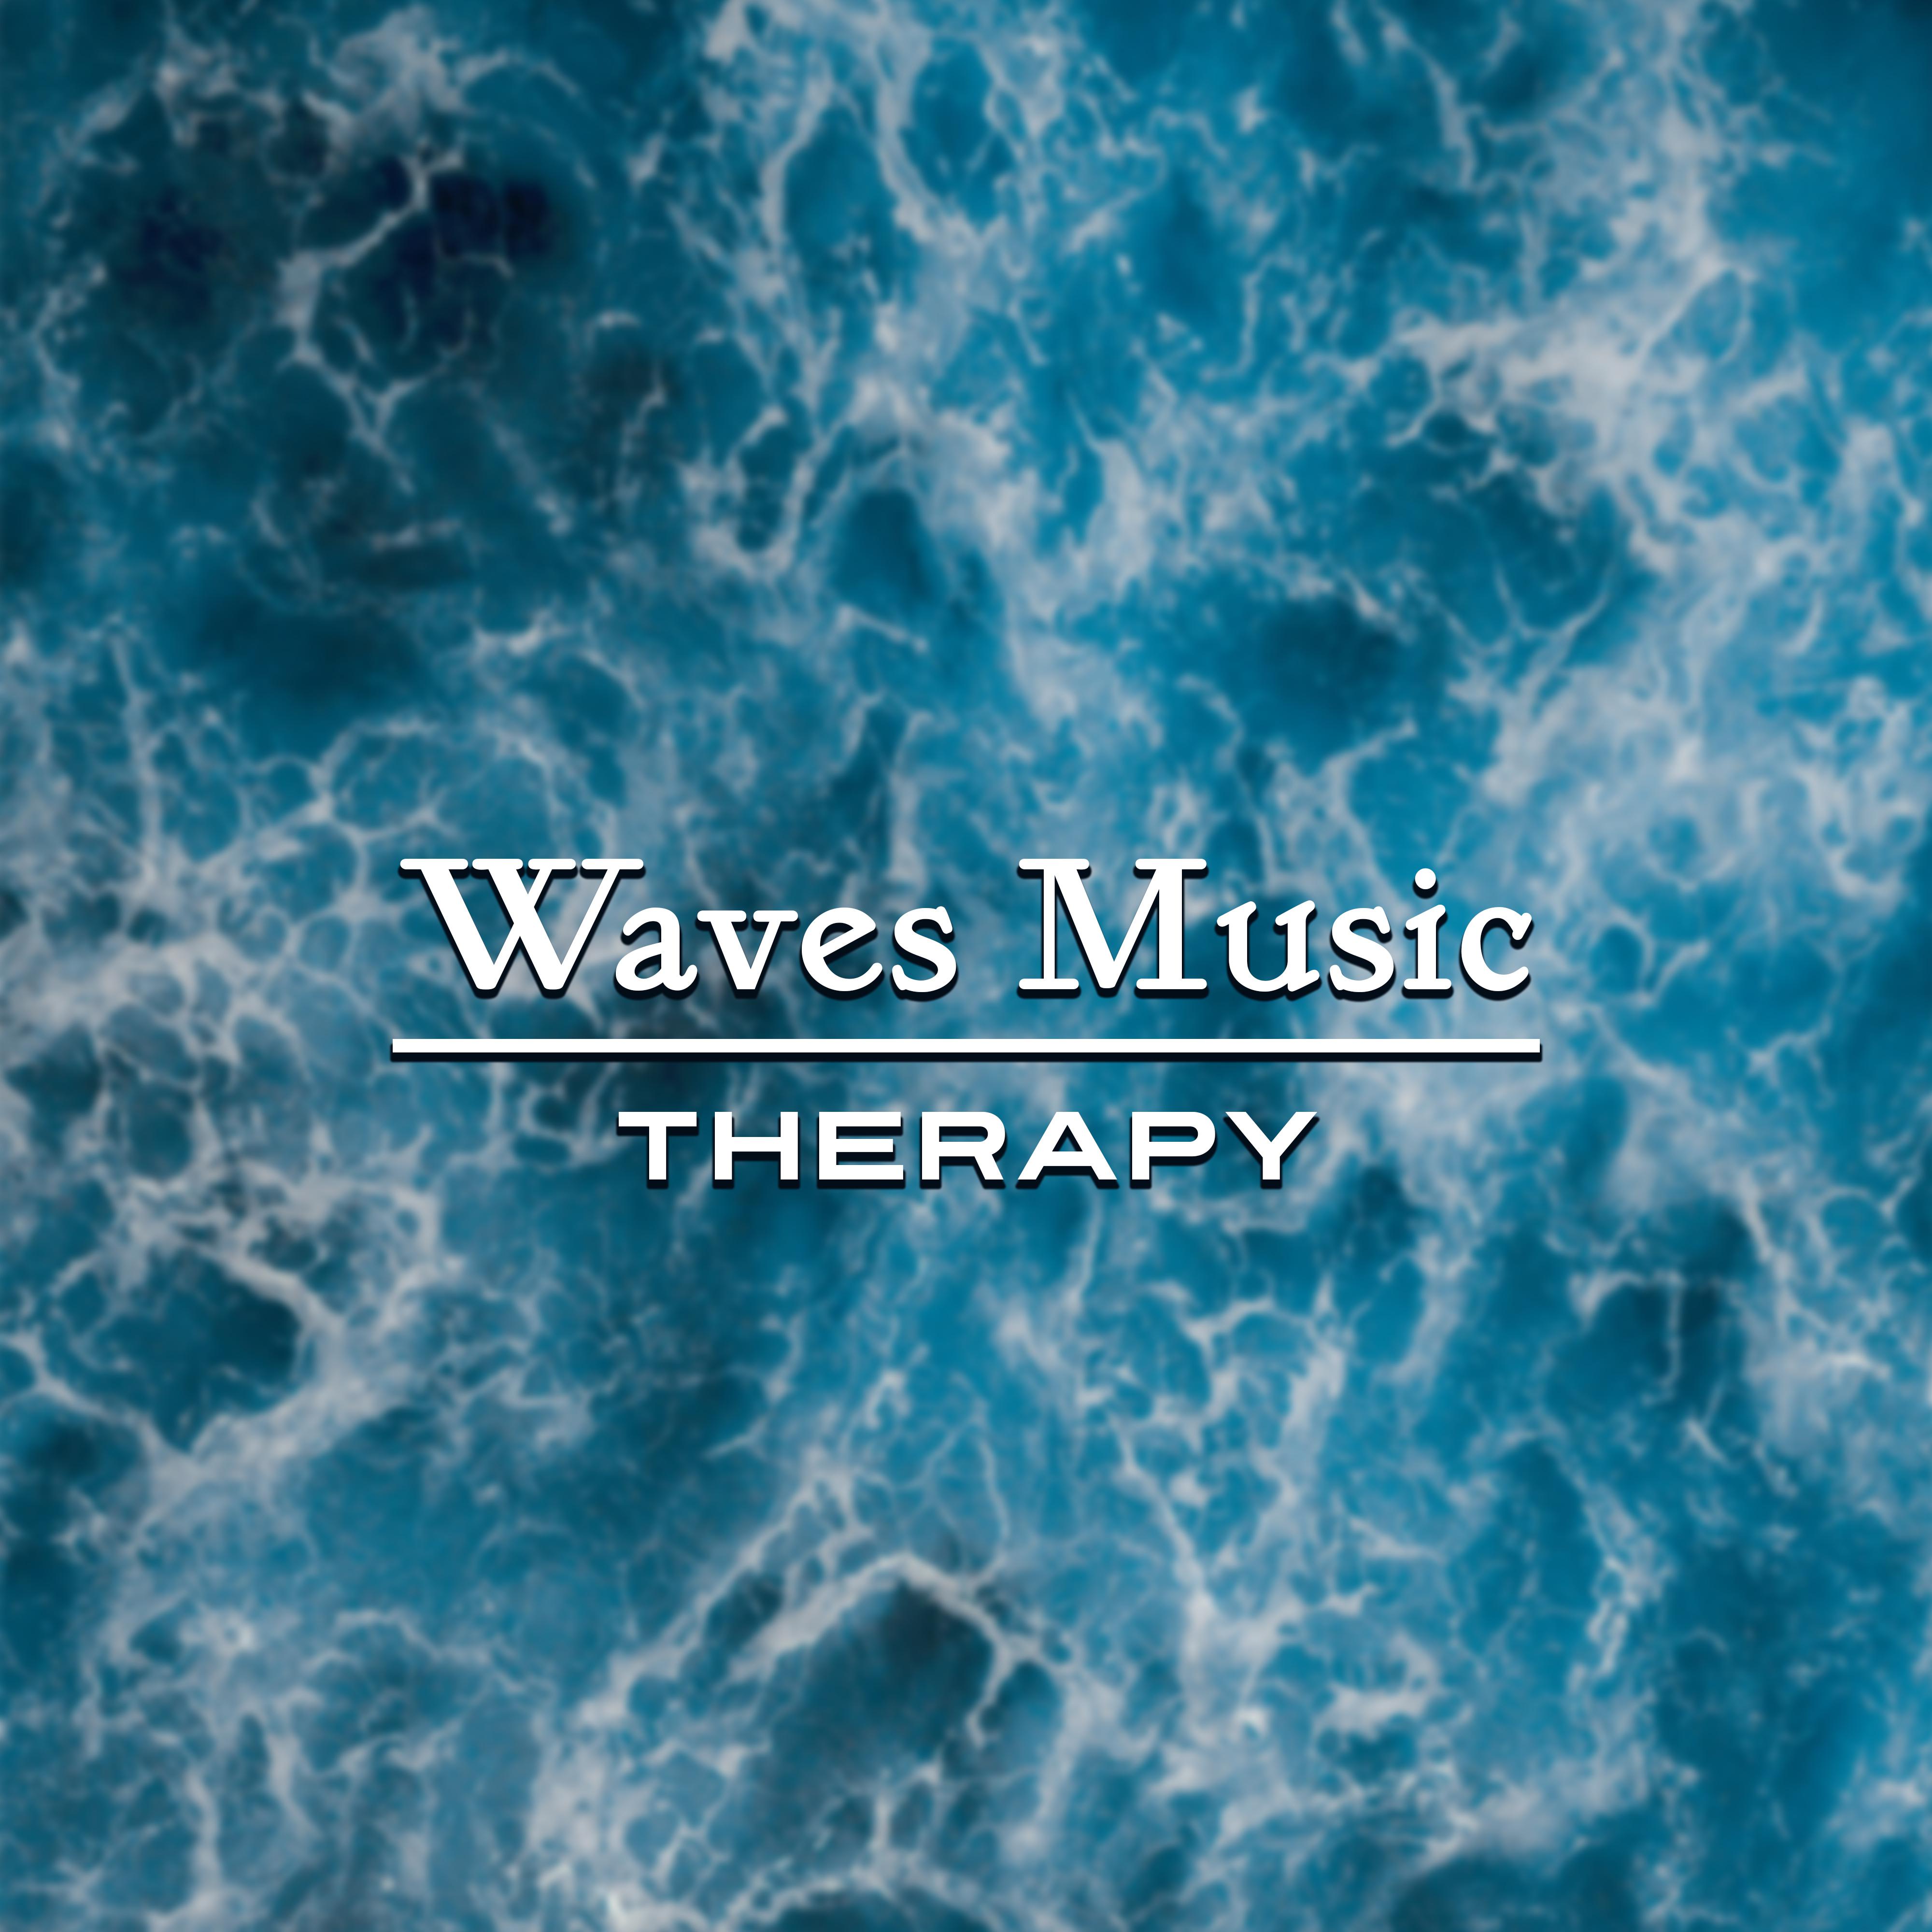 Waves Music Therapy – Sounds of Nature, Calming Waves, Zen, Rest, Relief Stress, New Age 2017